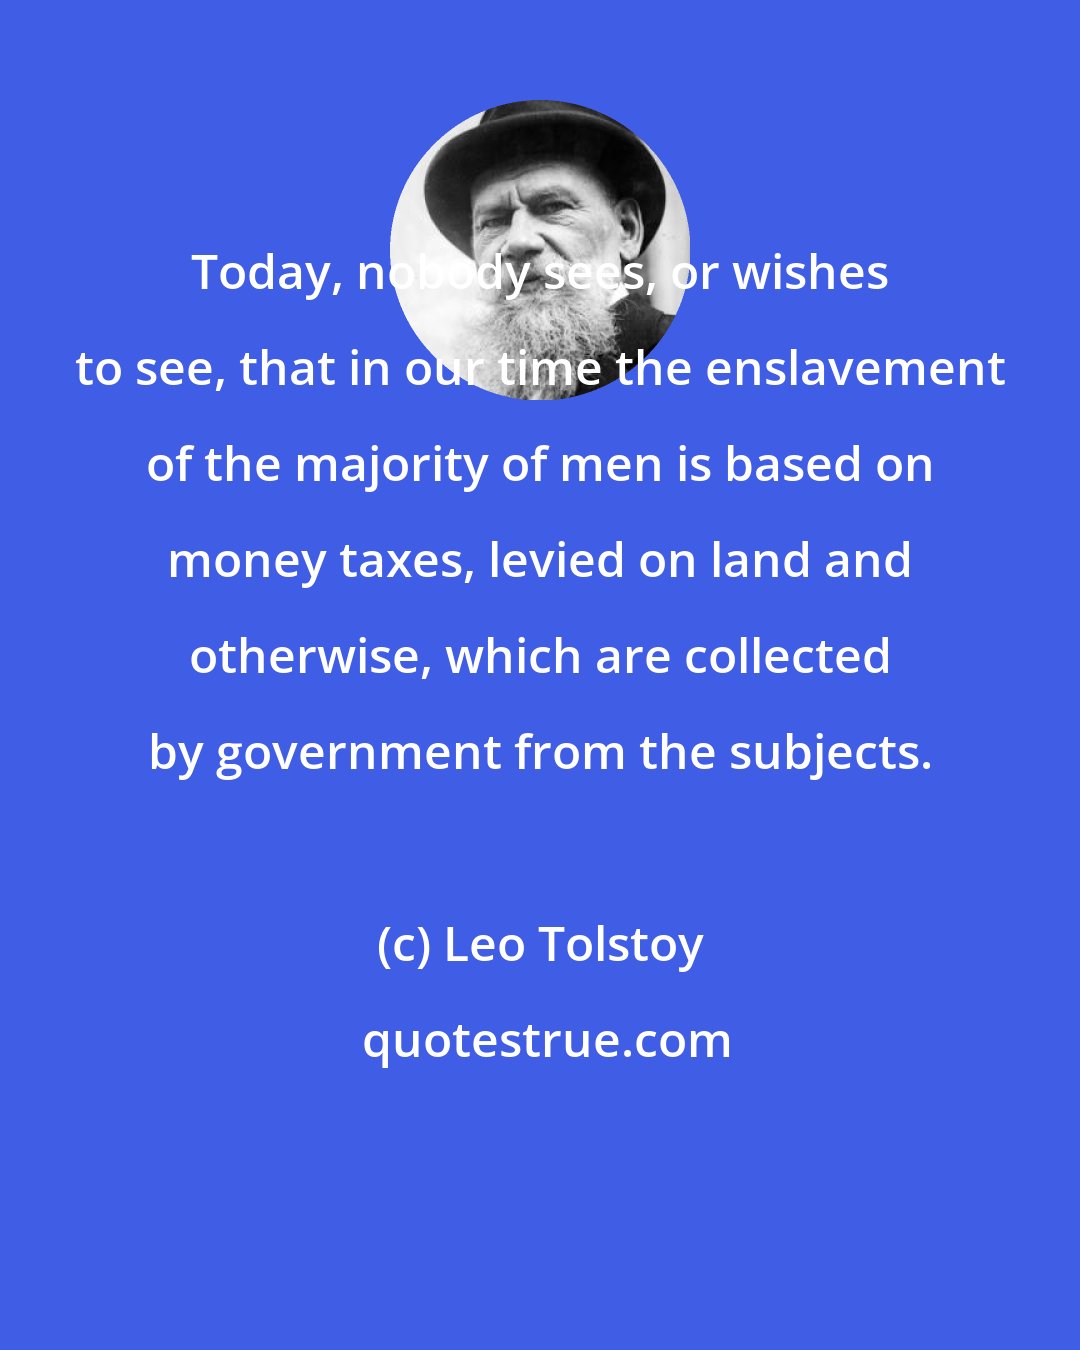 Leo Tolstoy: Today, nobody sees, or wishes to see, that in our time the enslavement of the majority of men is based on money taxes, levied on land and otherwise, which are collected by government from the subjects.